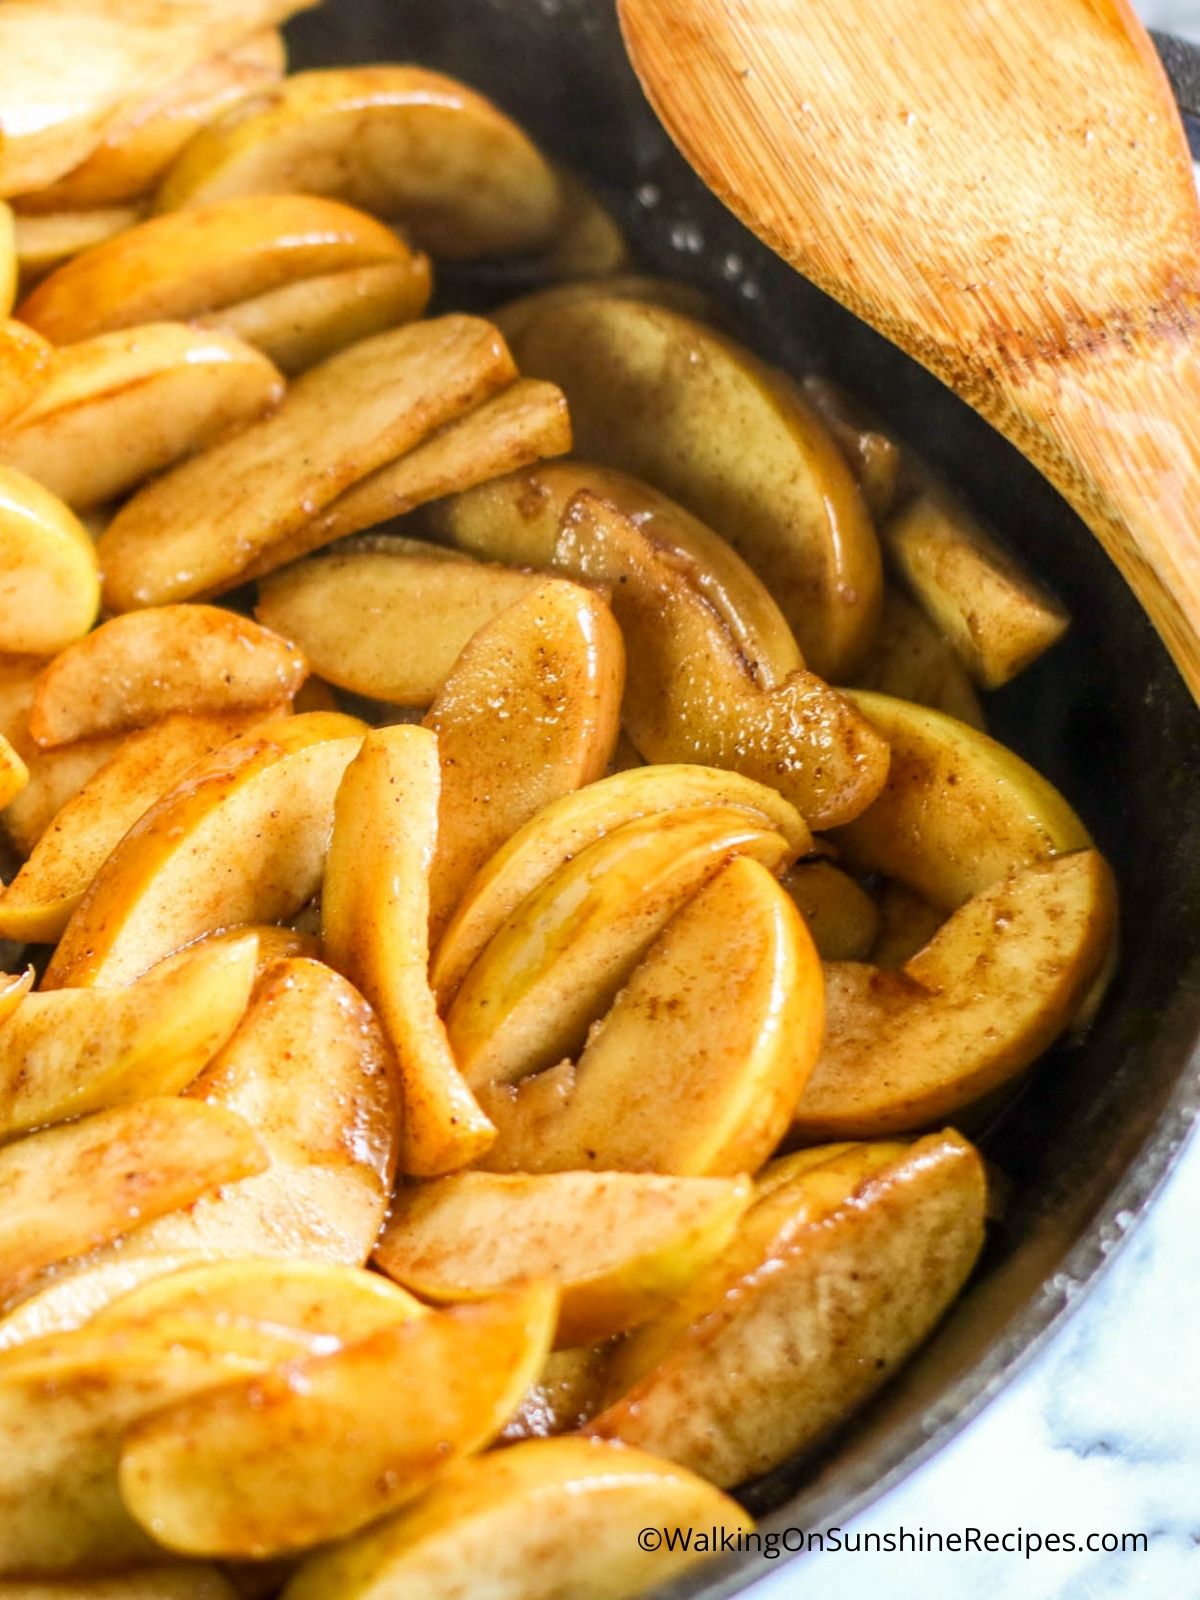 Cook apples in cast iron pan till soft and tender.